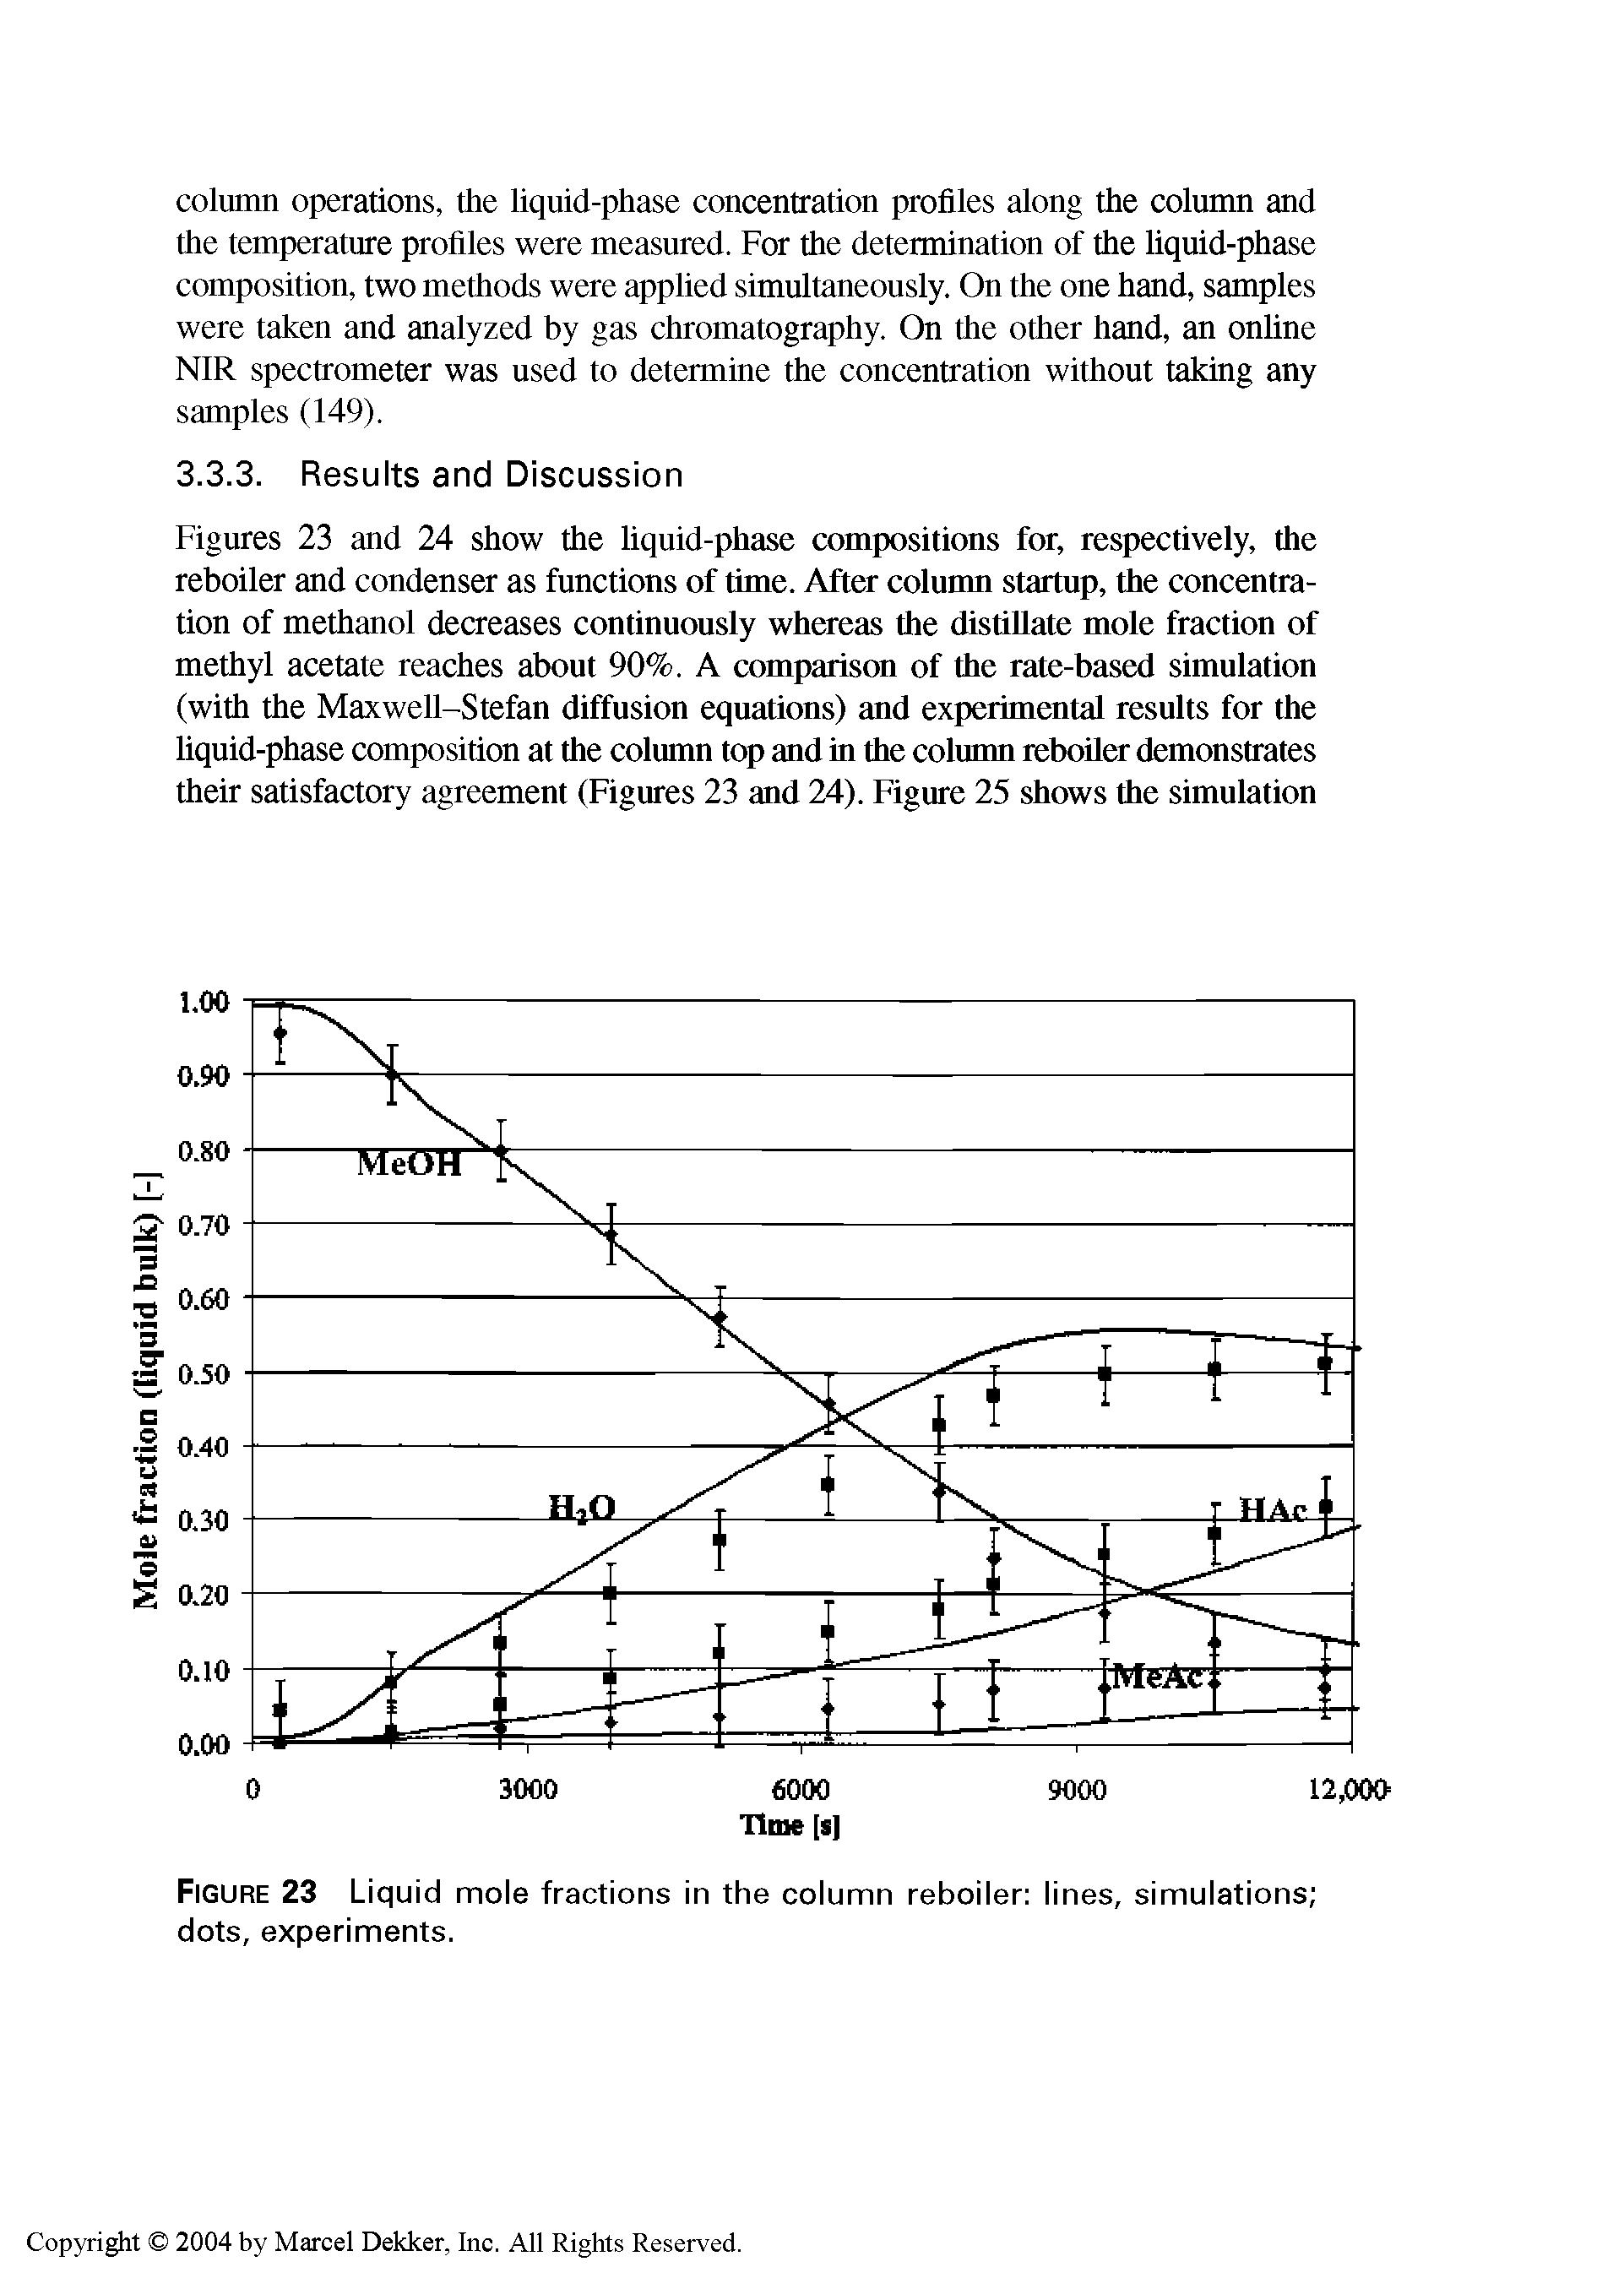 Figures 23 and 24 show the liquid-phase compositions for, respectively, the reboiler and condenser as functions of time. After column startup, the concentration of methanol decreases continuously whereas the distillate mole fraction of methyl acetate reaches about 90%. A comparison of the rate-based simulation (with the Maxwell-Stefan diffusion equations) and experimental results for the liquid-phase composition at the column top and in the column reboiler demonstrates their satisfactory agreement (Figures 23 and 24). Figure 25 shows the simulation...